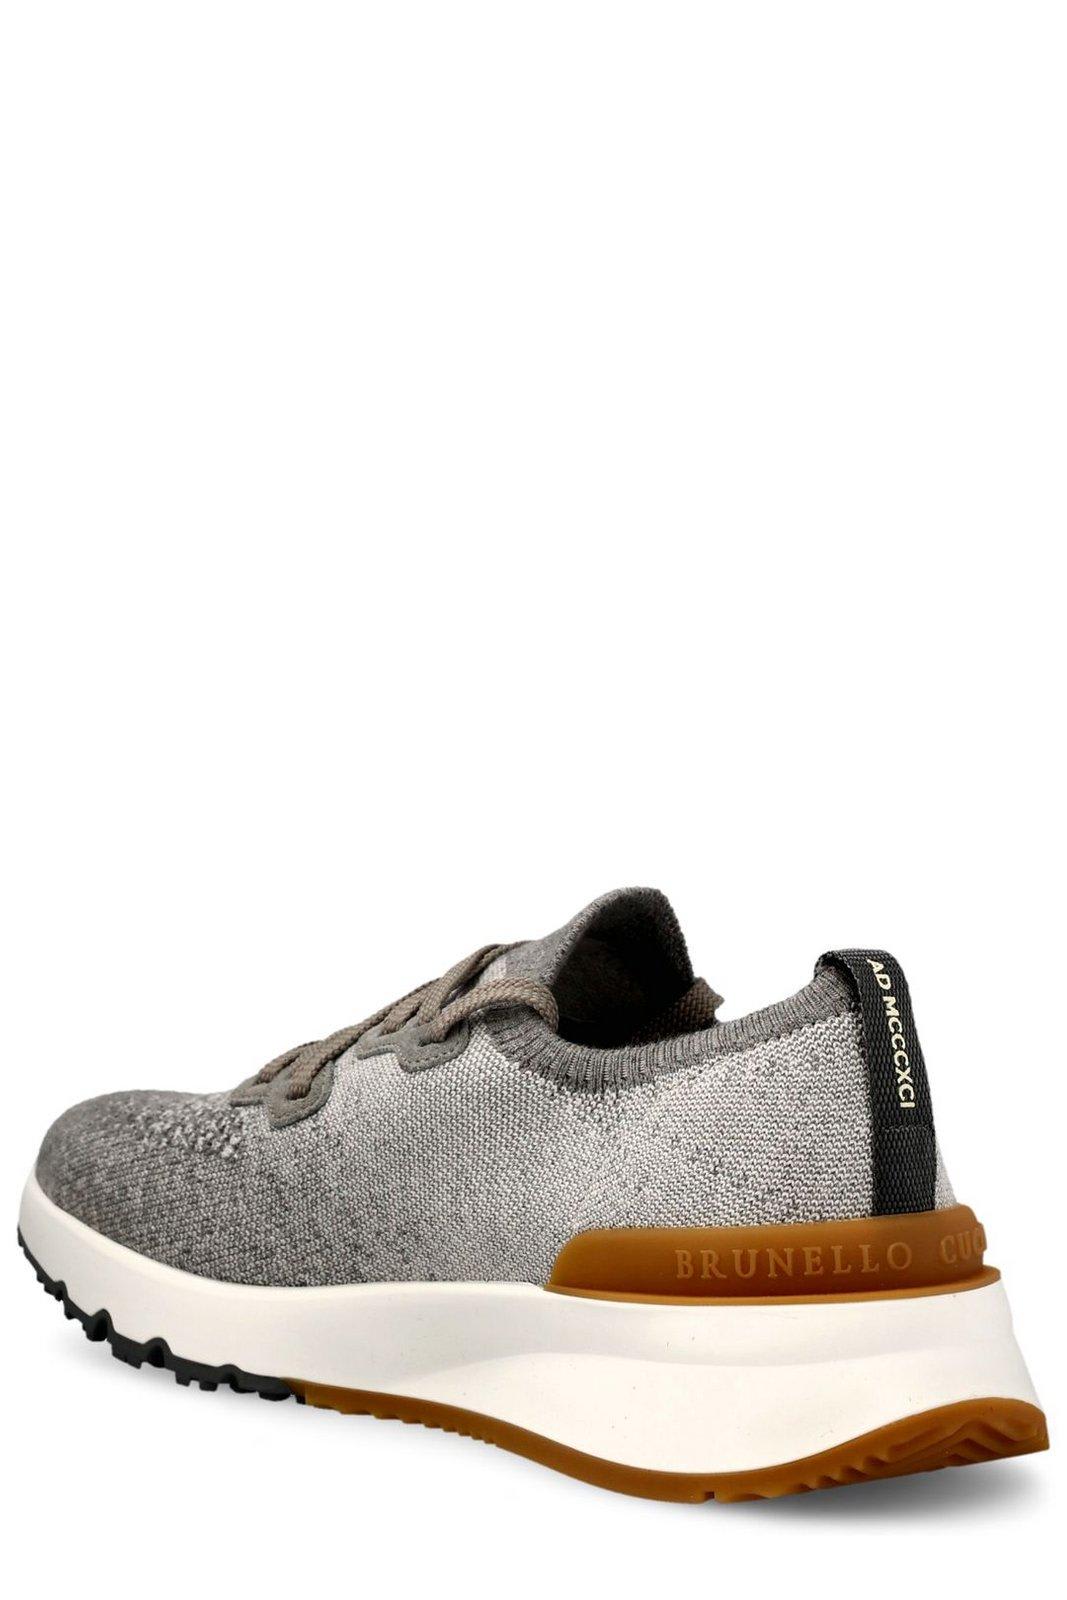 Shop Brunello Cucinelli Lace Up Sock Sneakers In Grey